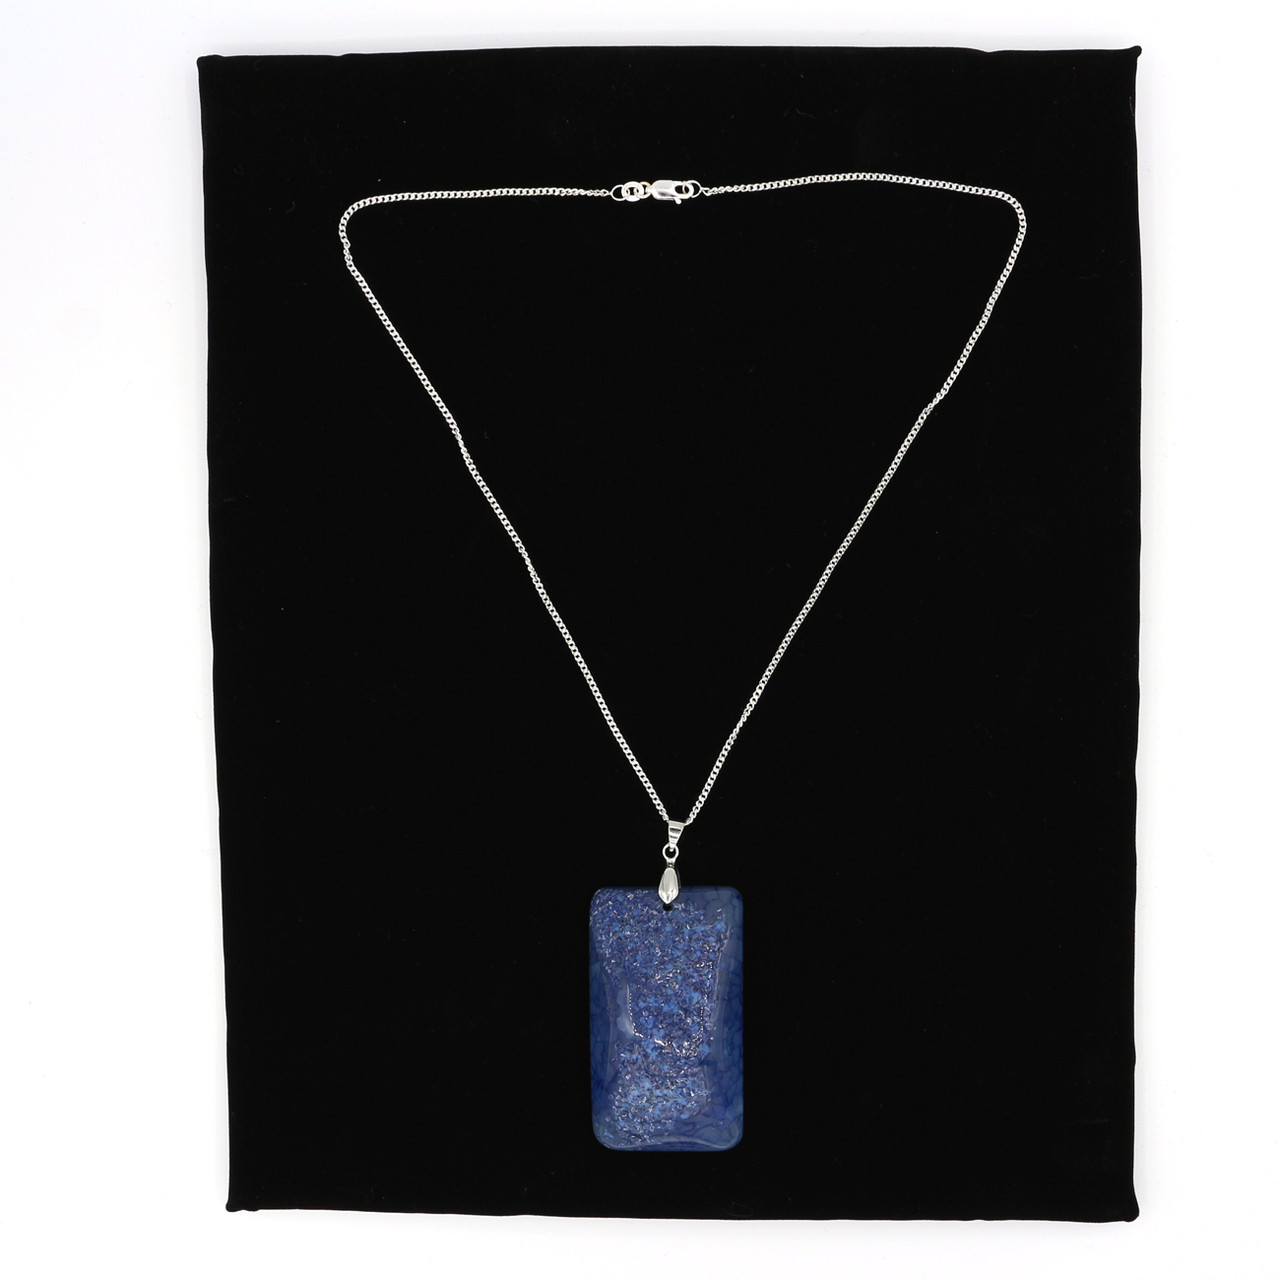 John Bead Semiprecious Stone Pendant Rectangle Blue With Silver Plated Necklace copy 08538.1593197922